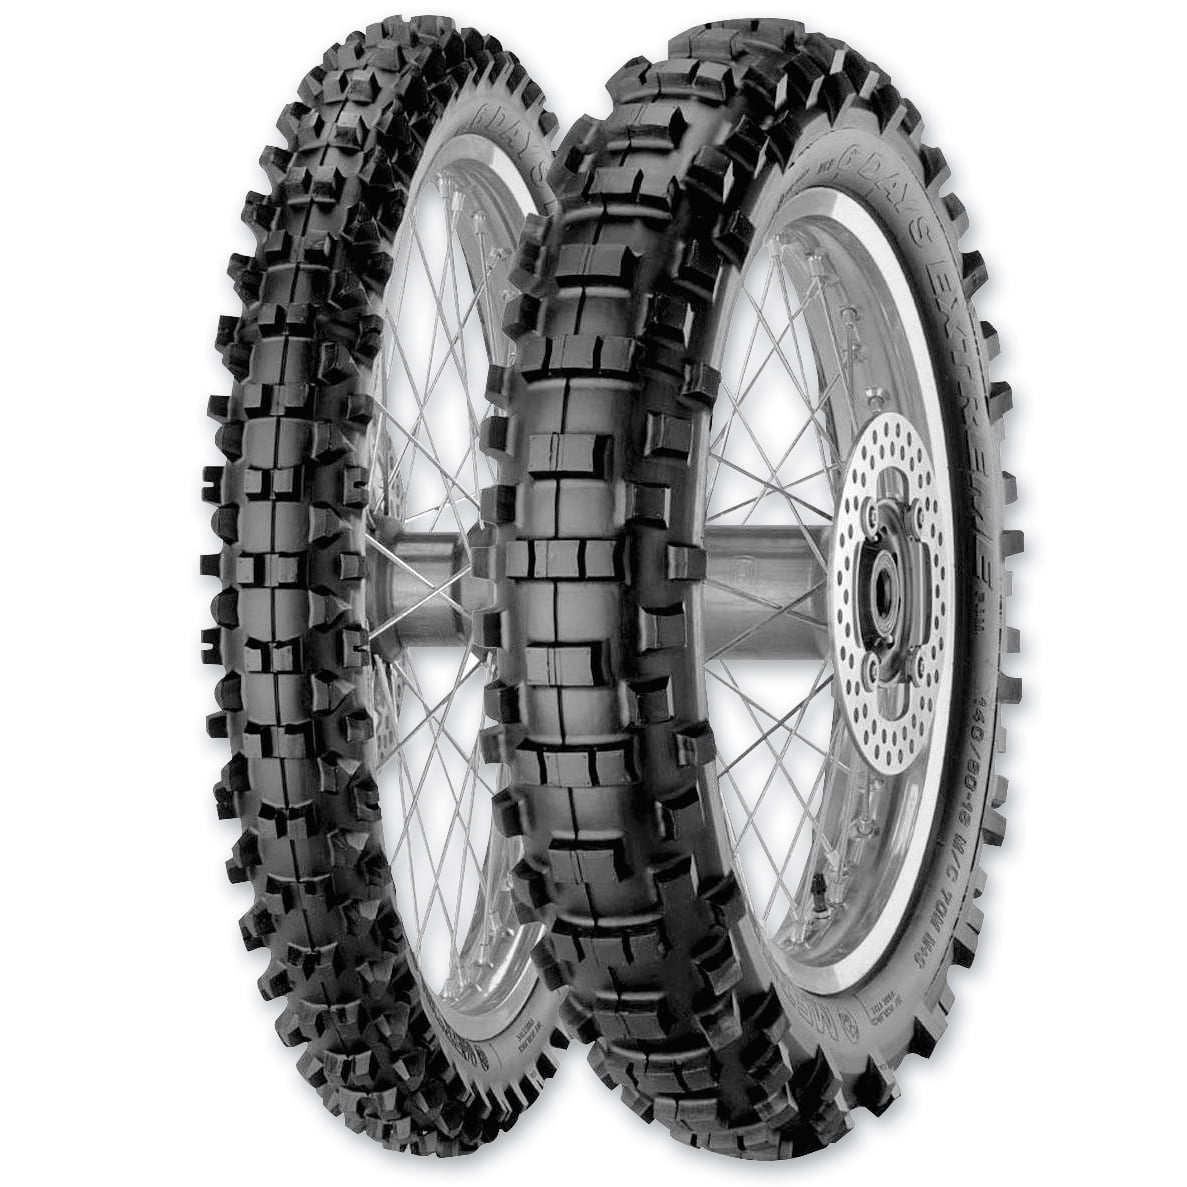 140/80-18 2529900 Metzeler 6 Days Extreme Offroad Rear Tire 